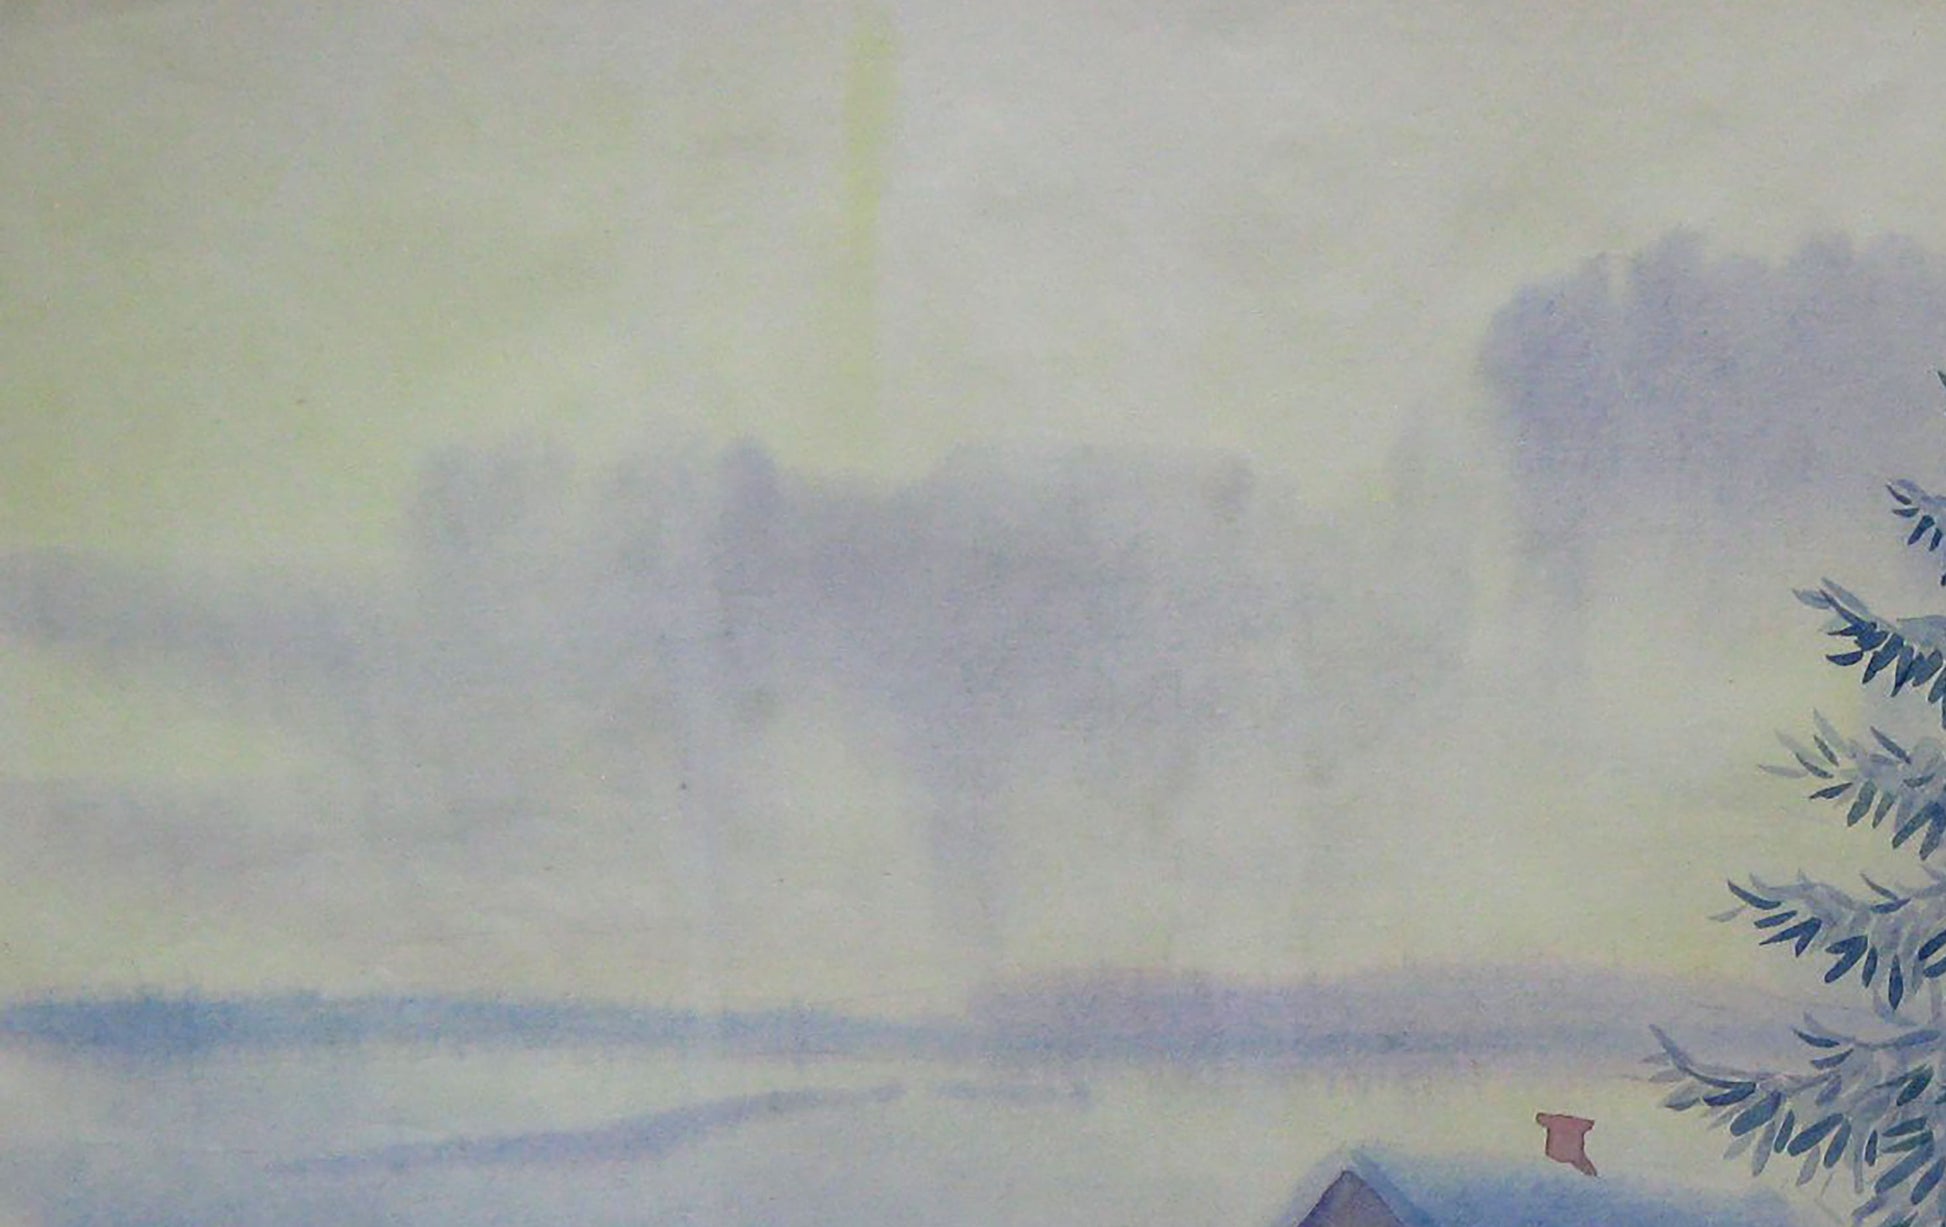 January Morning: a watercolor painting by Valery Savenets